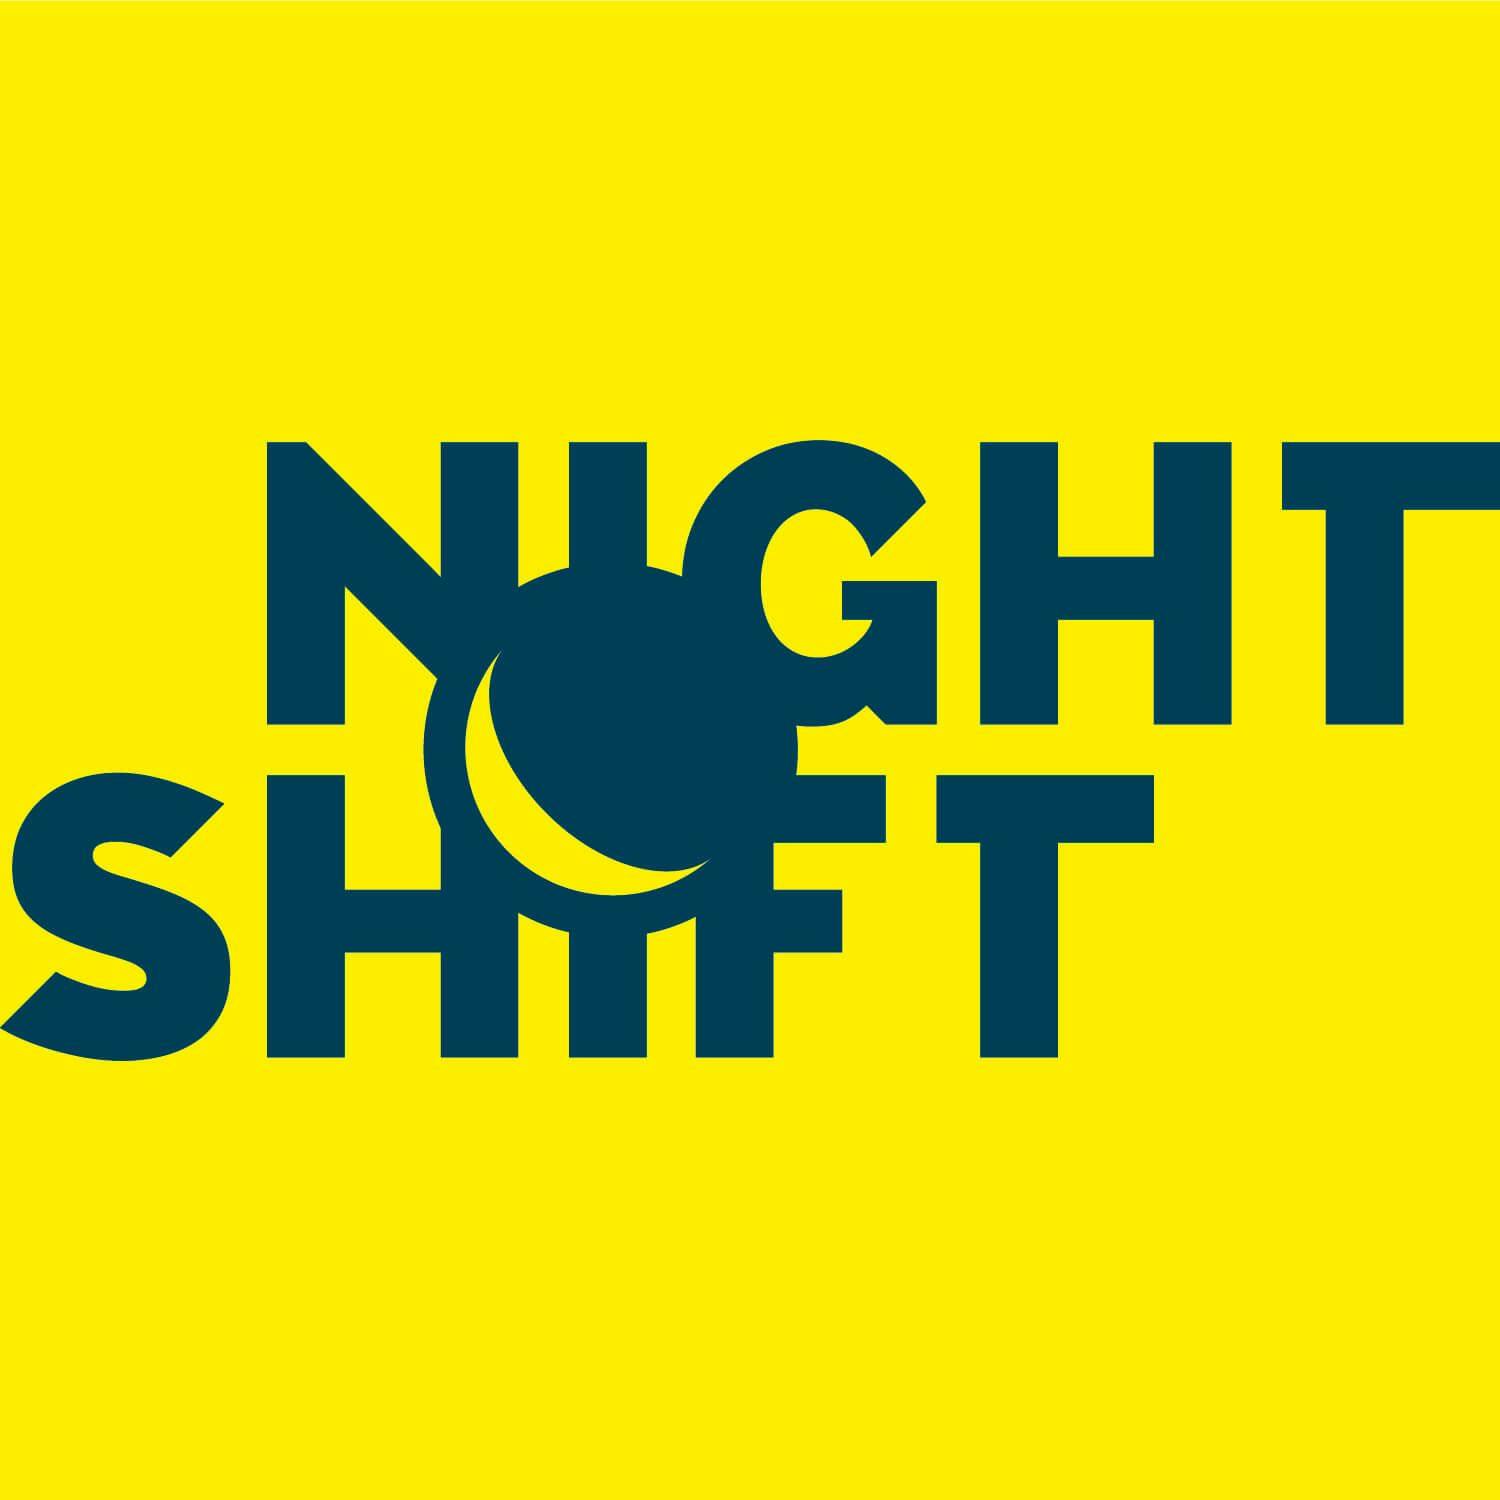 Image by Night Shift 